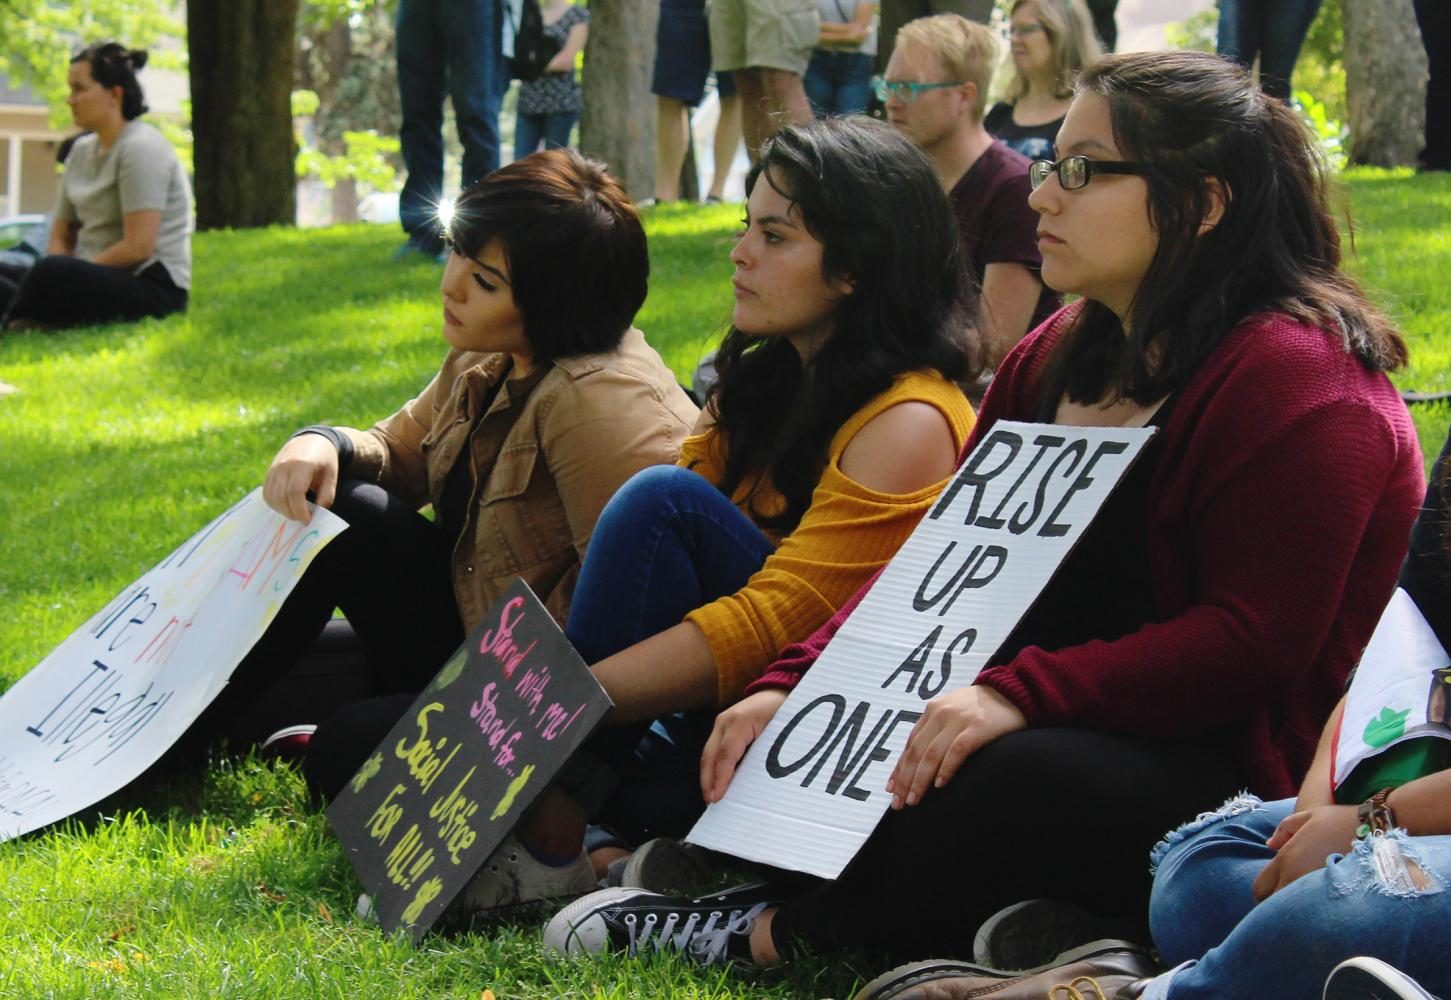 Julissa Rivers (middle) and Isabel Robles (right) listen to speakers at the DACA rally

